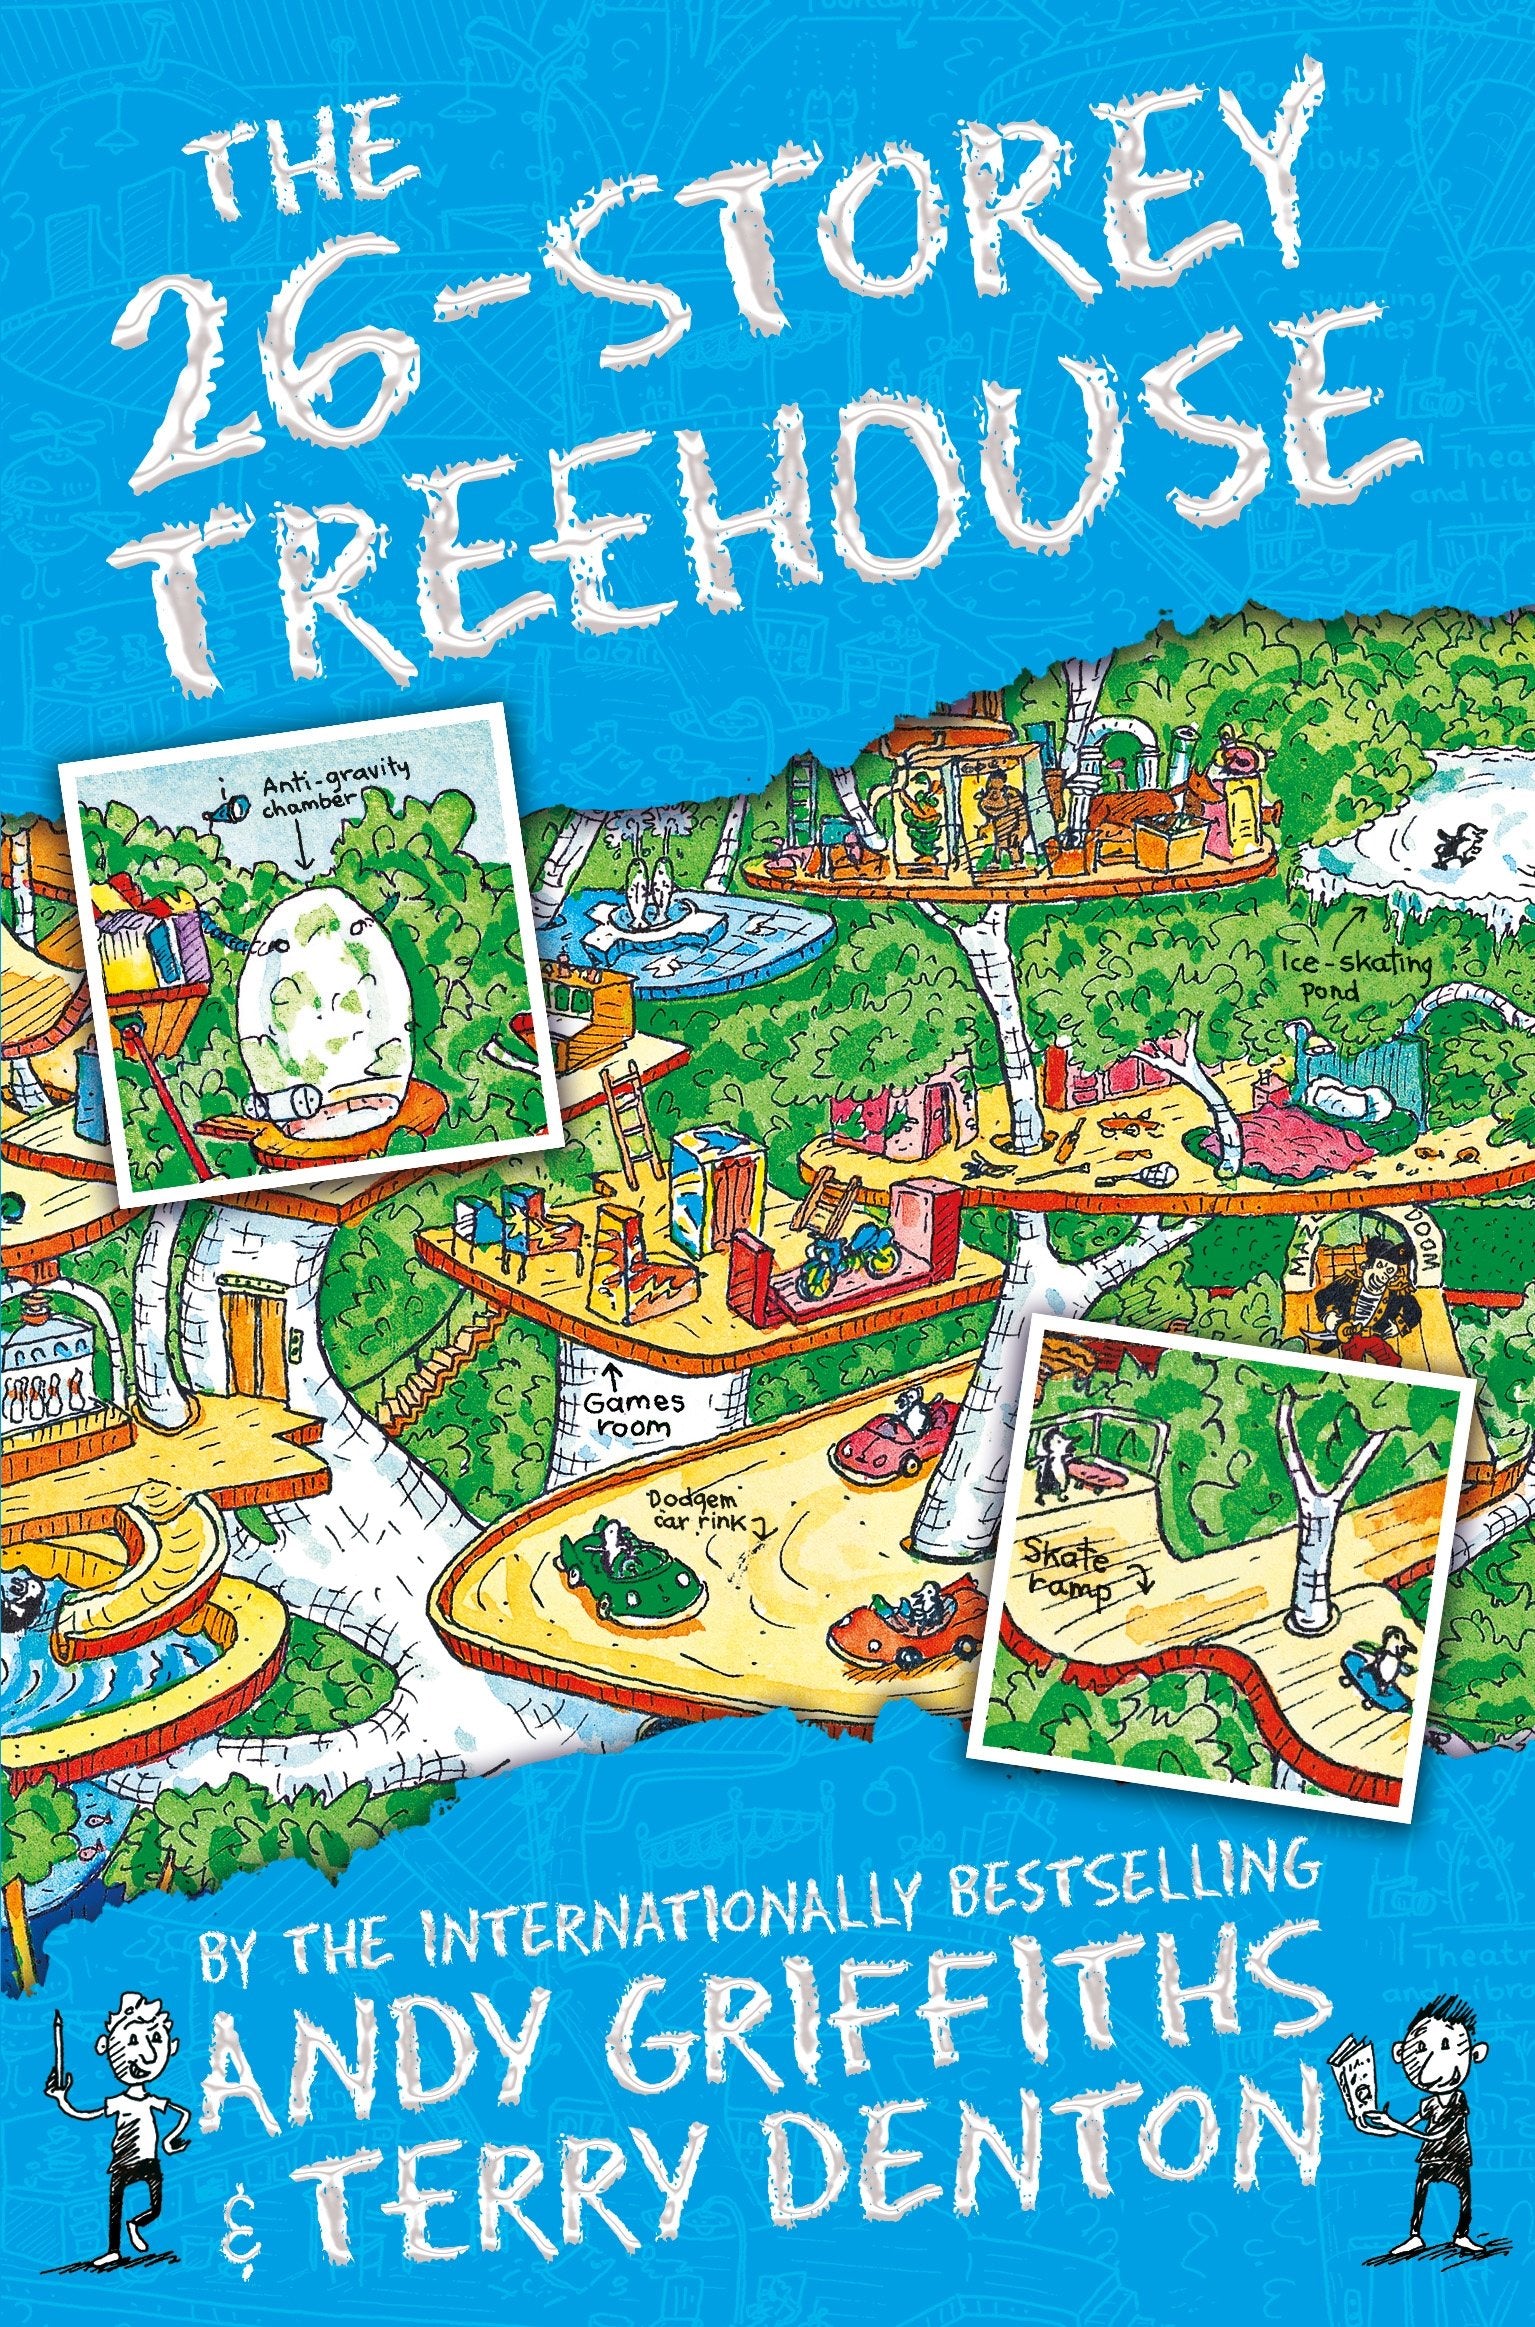 Signed Edition - The 26-Storey Treehouse